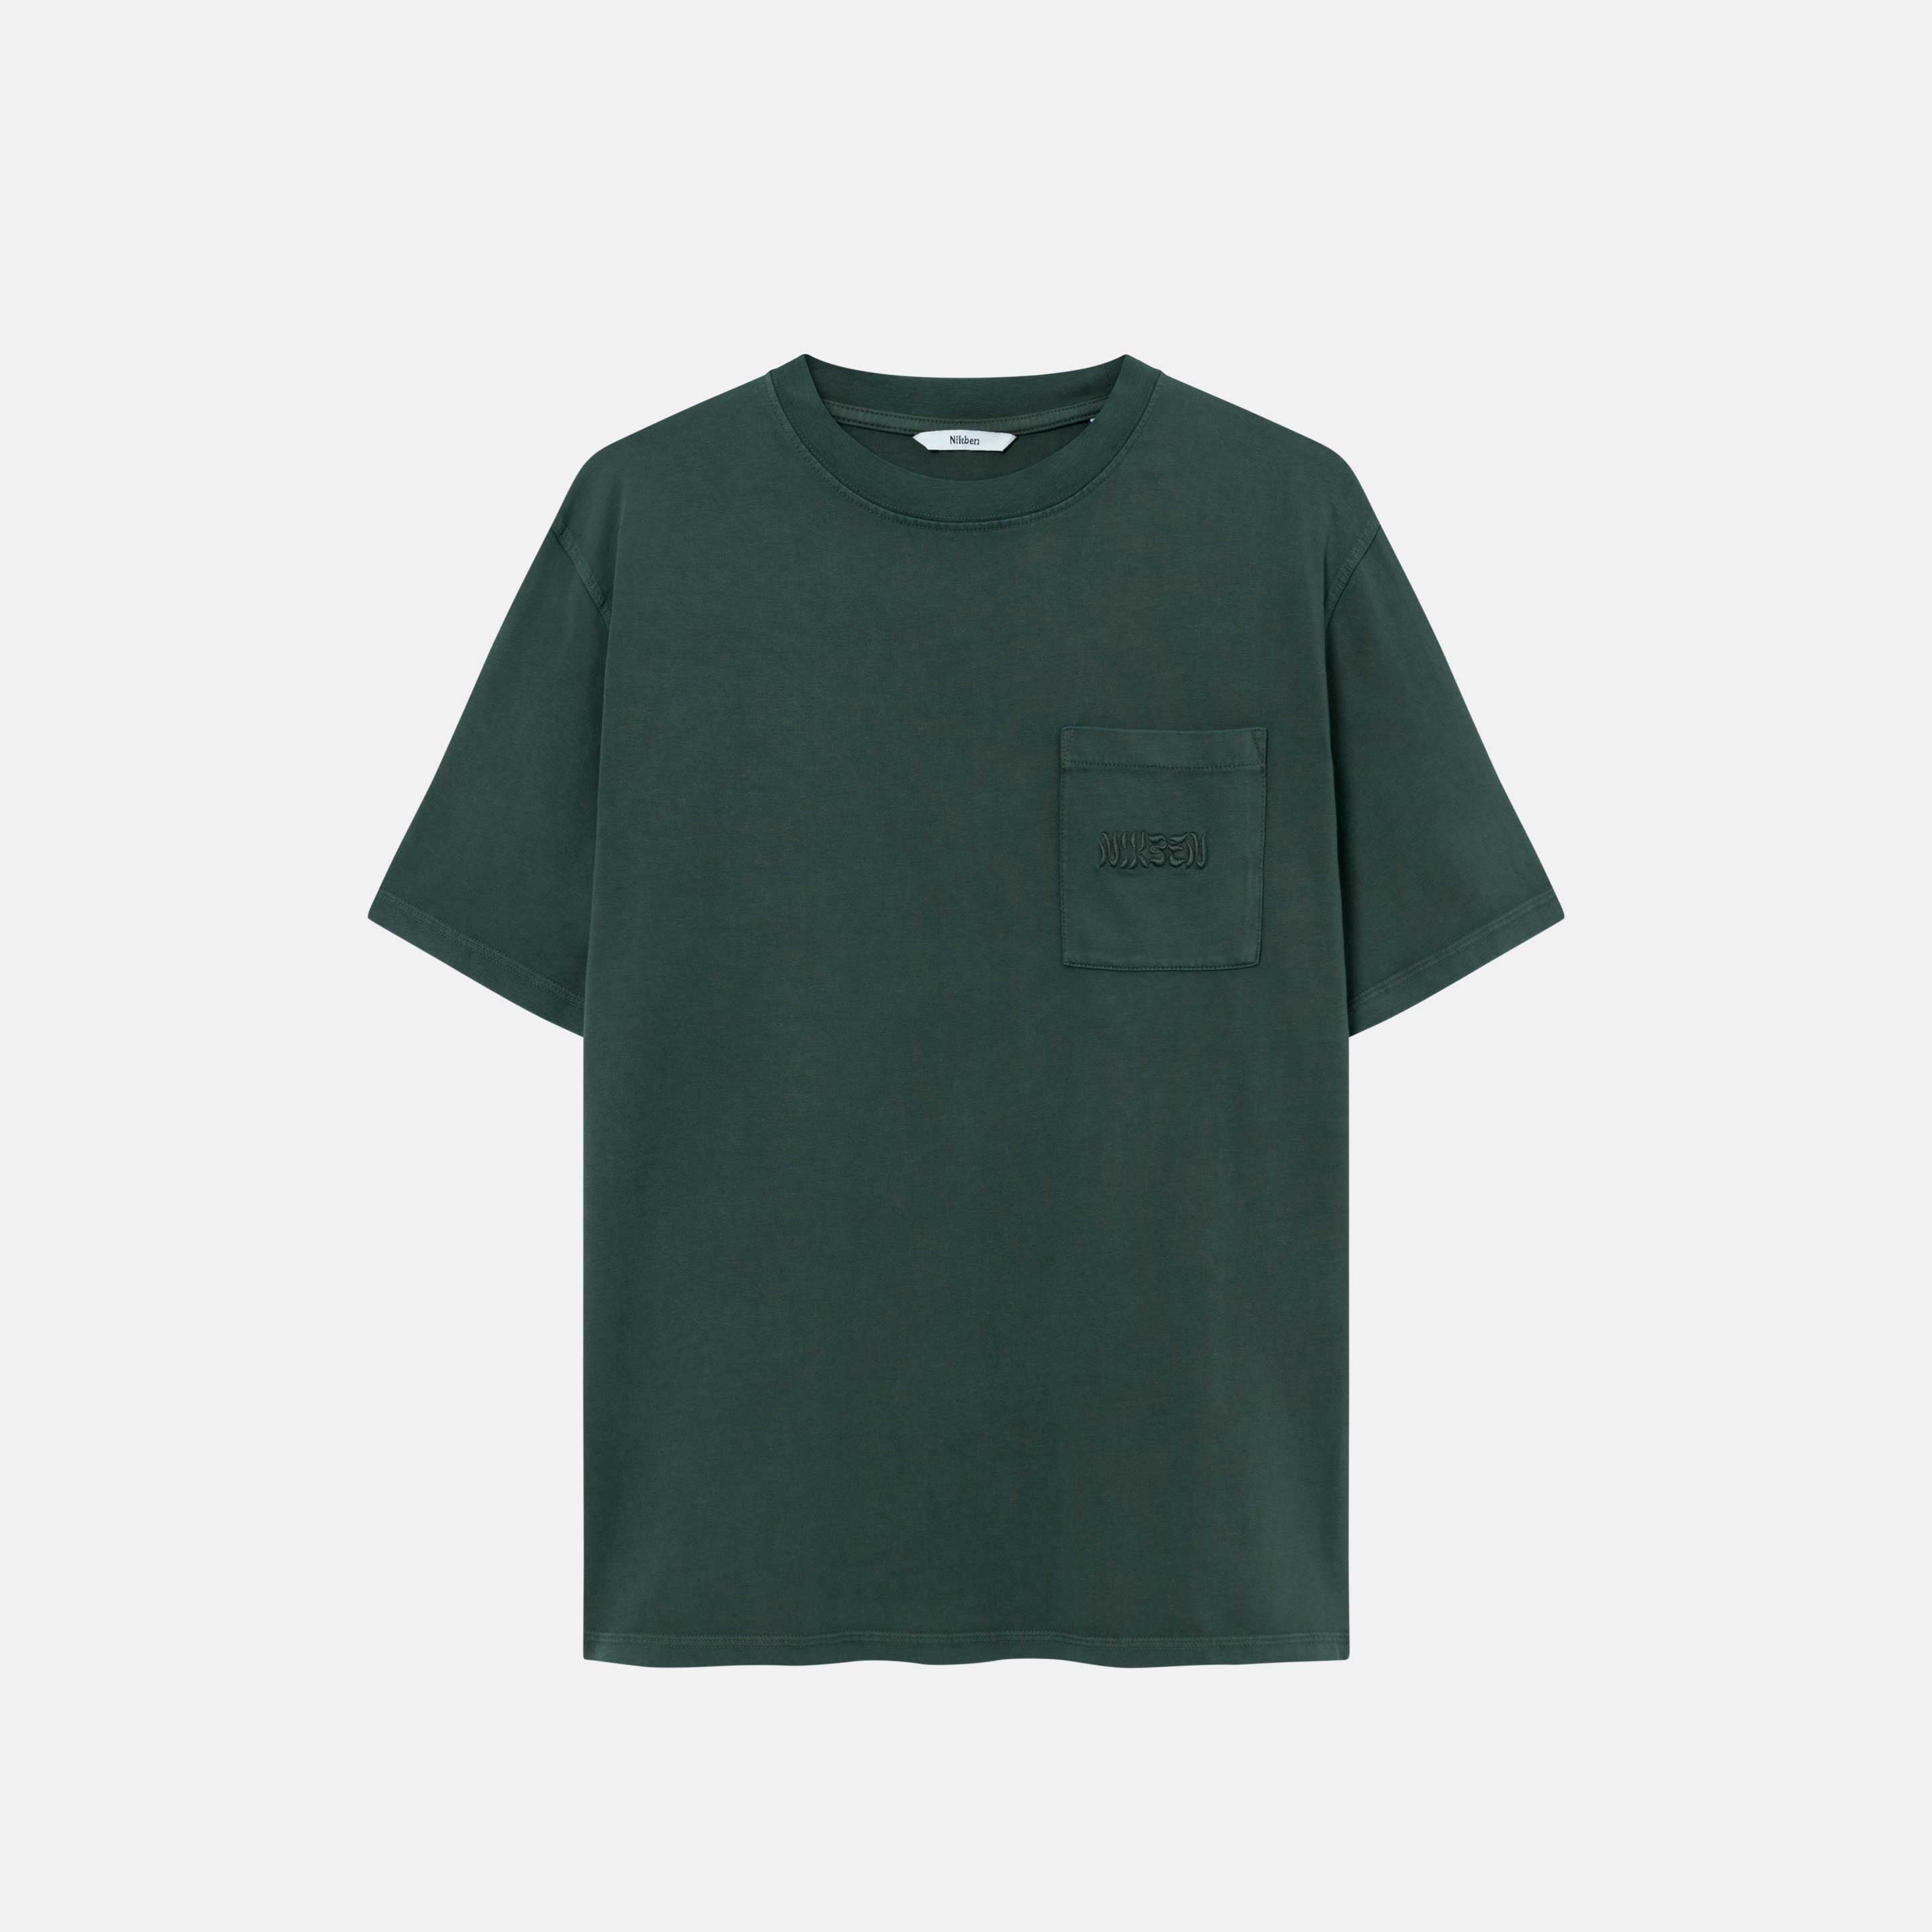 Washed green t-shirt with breast pocket and embroidered logo.